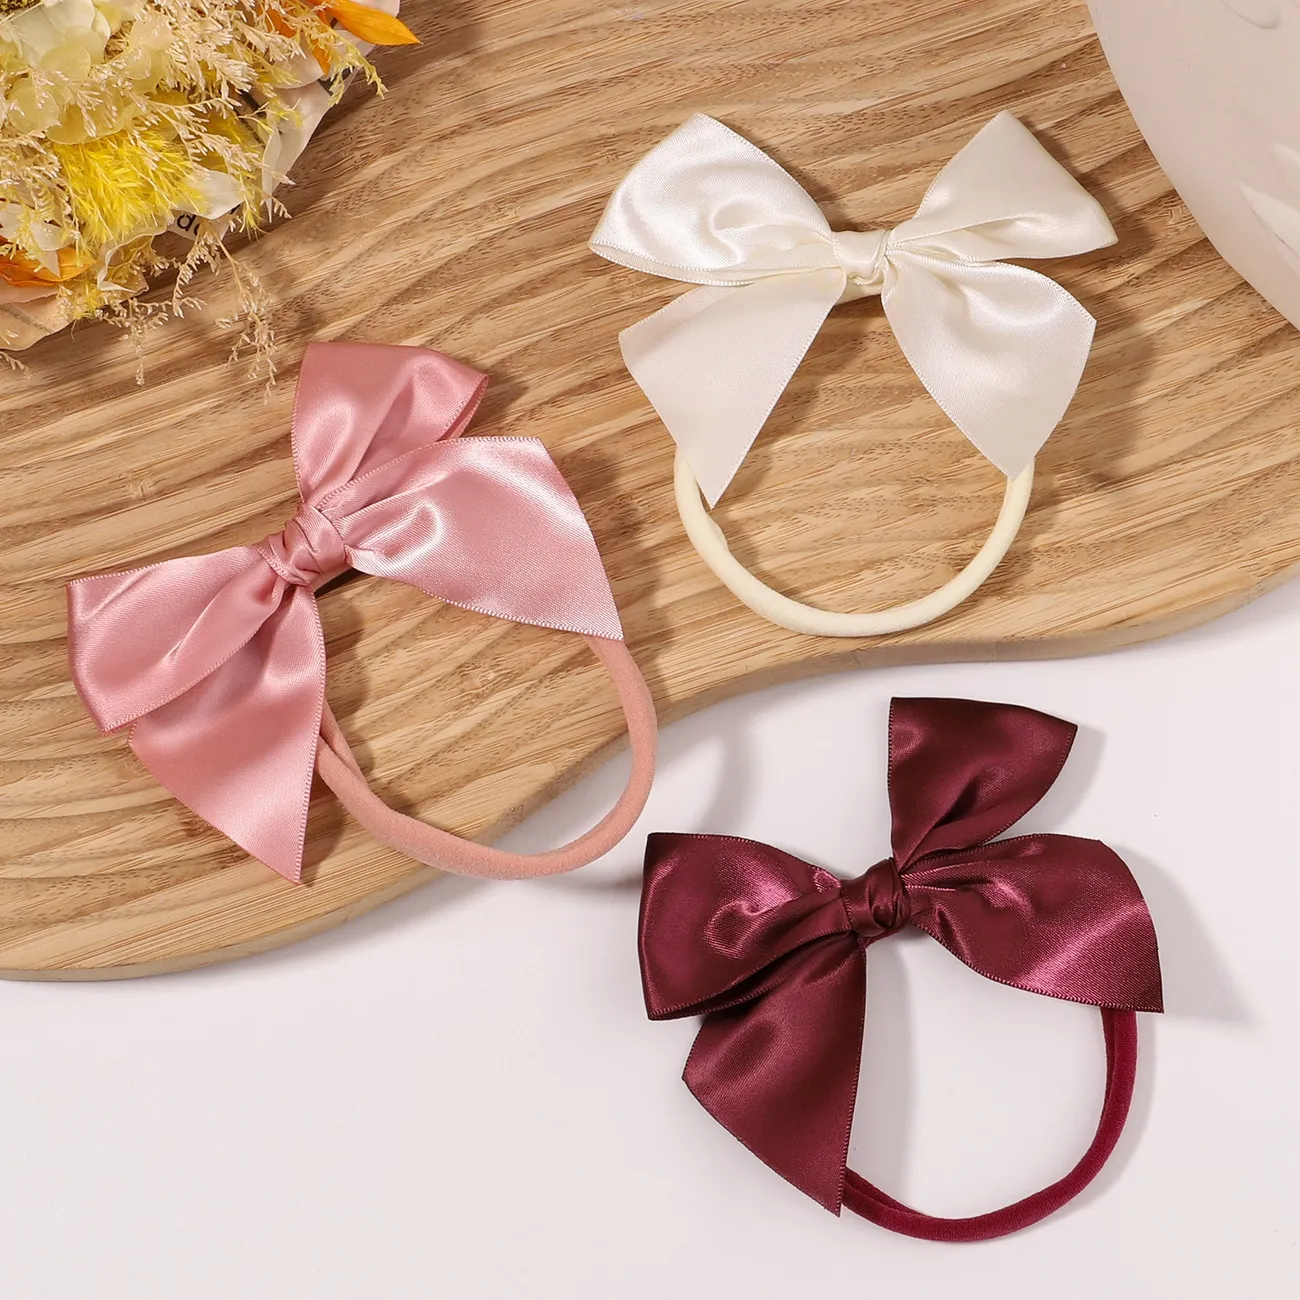 Baby Girl Sweet Simple and Versatile Headband with Bow Design Pink big image 1